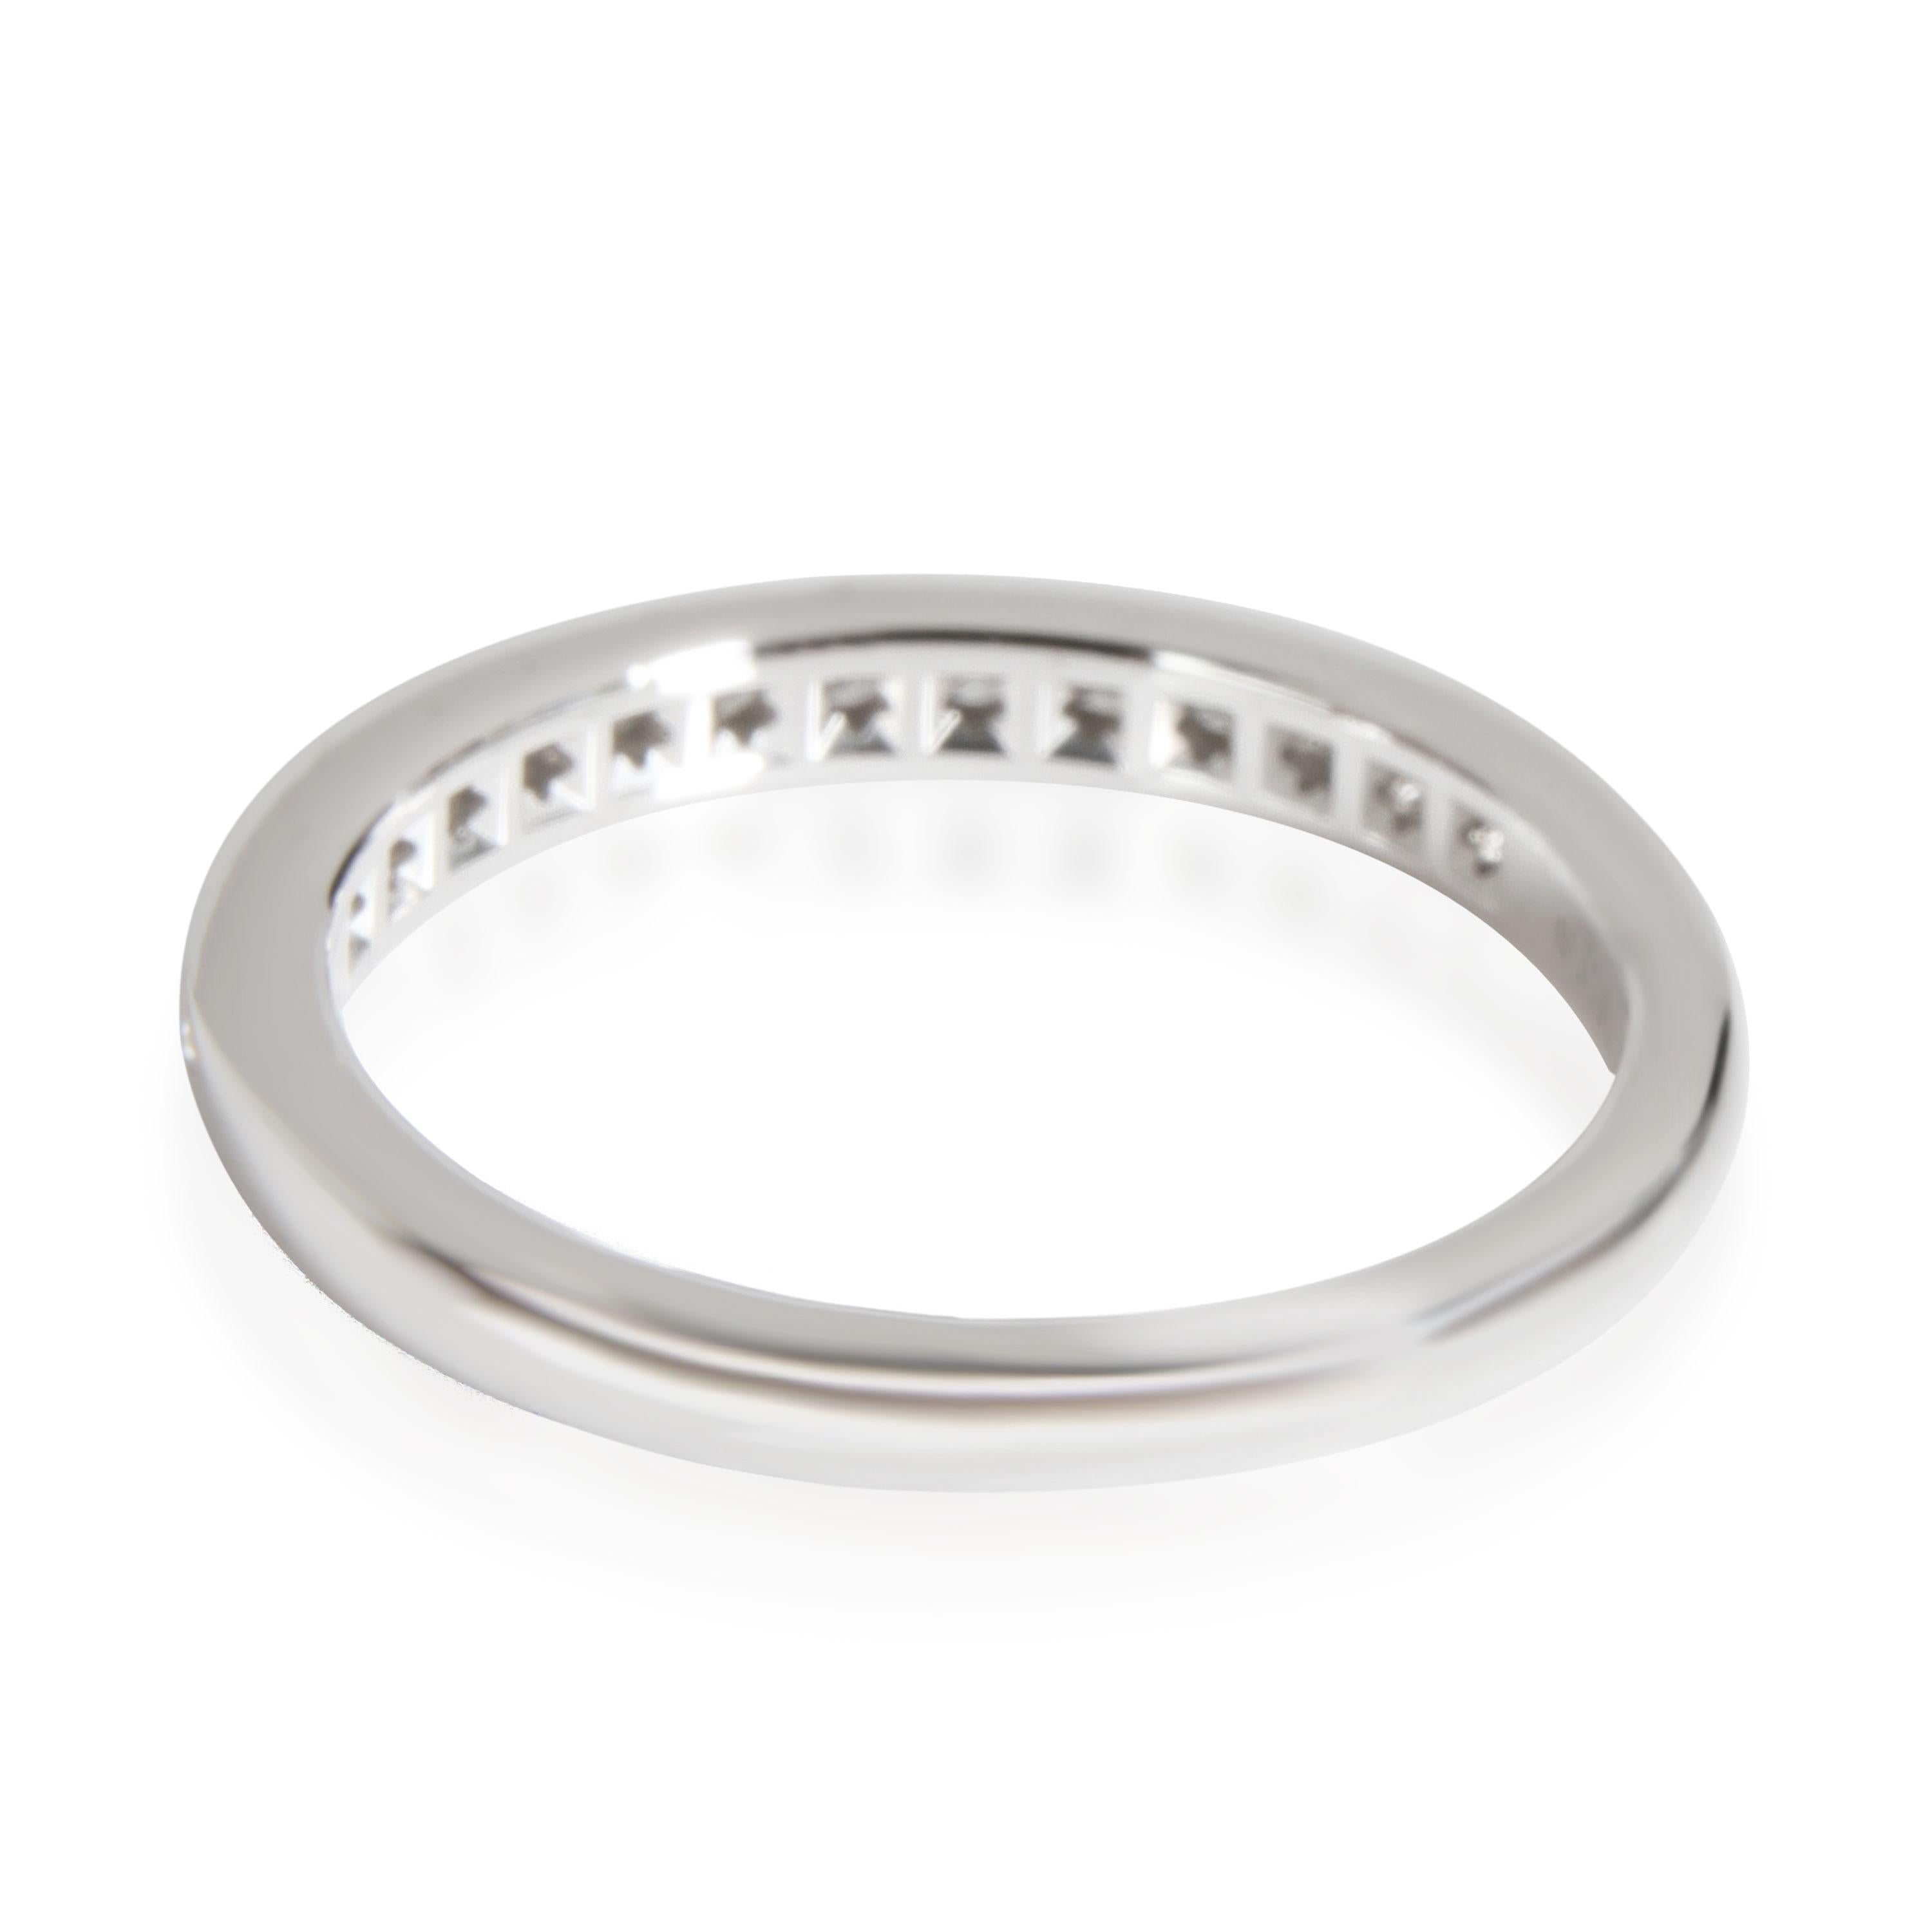 Tiffany & Co. Diamond Channel Set 2.5 mm Wedding Band in Platinum 0.24 Ctw

SKU: 112688

Retails for 2,600 USD. In excellent condition and recently polished. Ring size is 5.5.

Brand: Tiffany & Co.
Metal Type: Platinum
Ring Size: 5.5
Pre-Owned